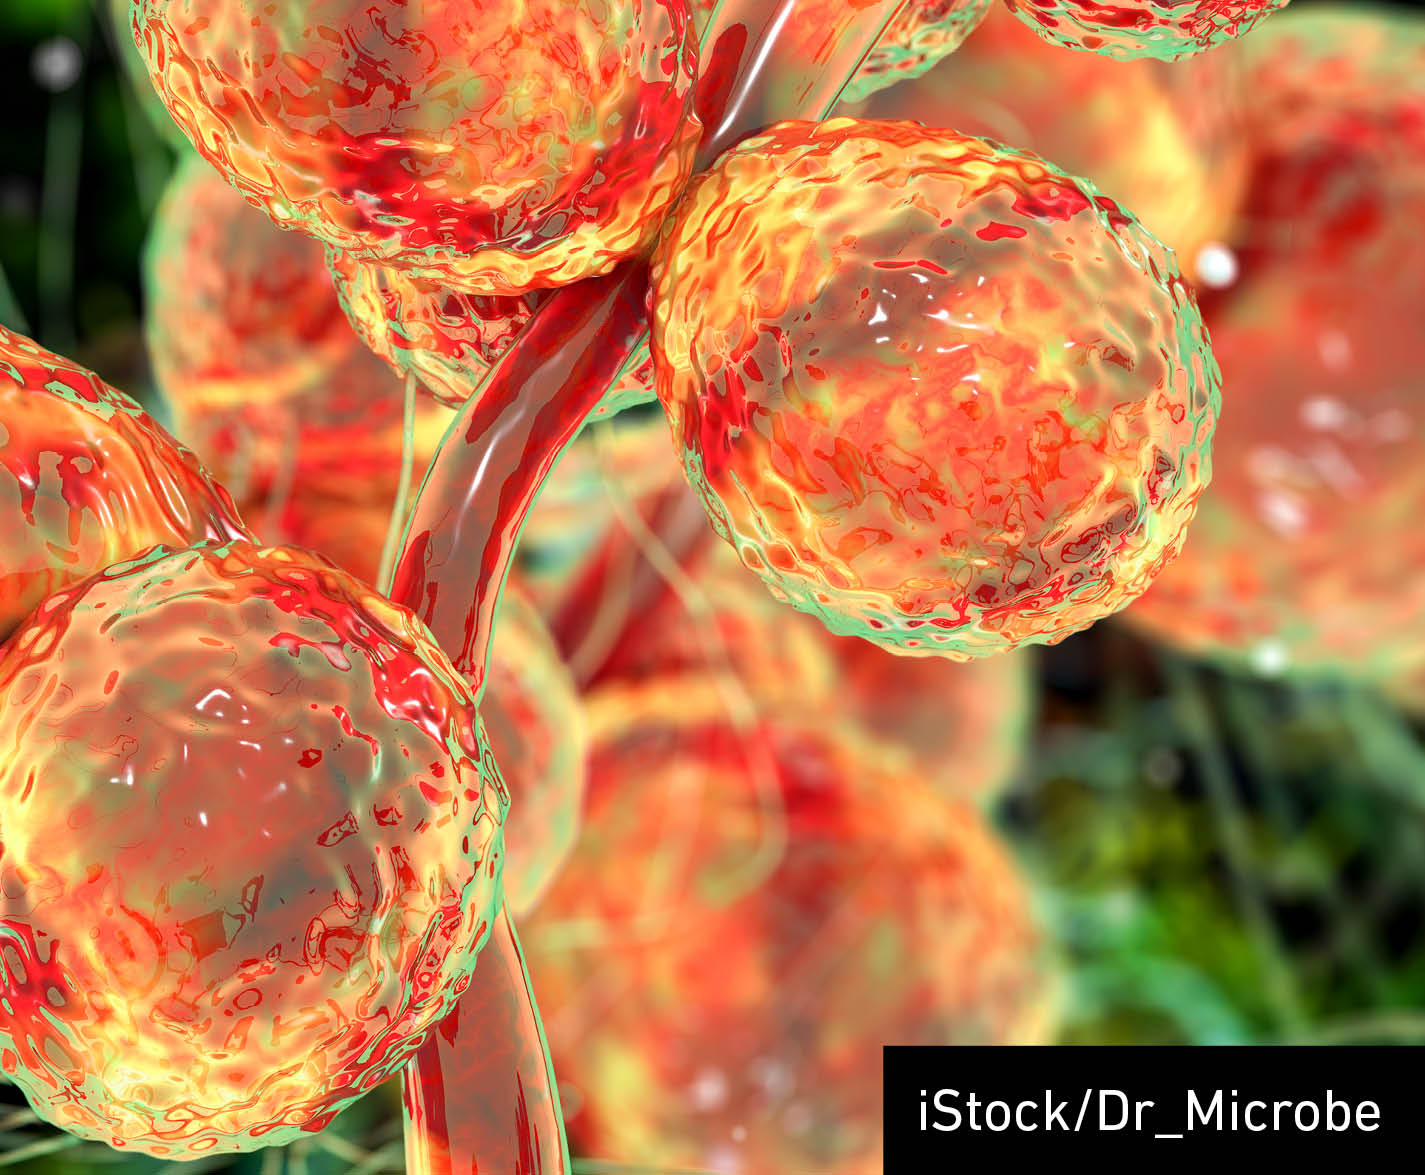 Candida fungi, Trichomonascus, or Candida ciferrii, C. auris, C. albicans and other human pathogenic yeasts, 3D illustration